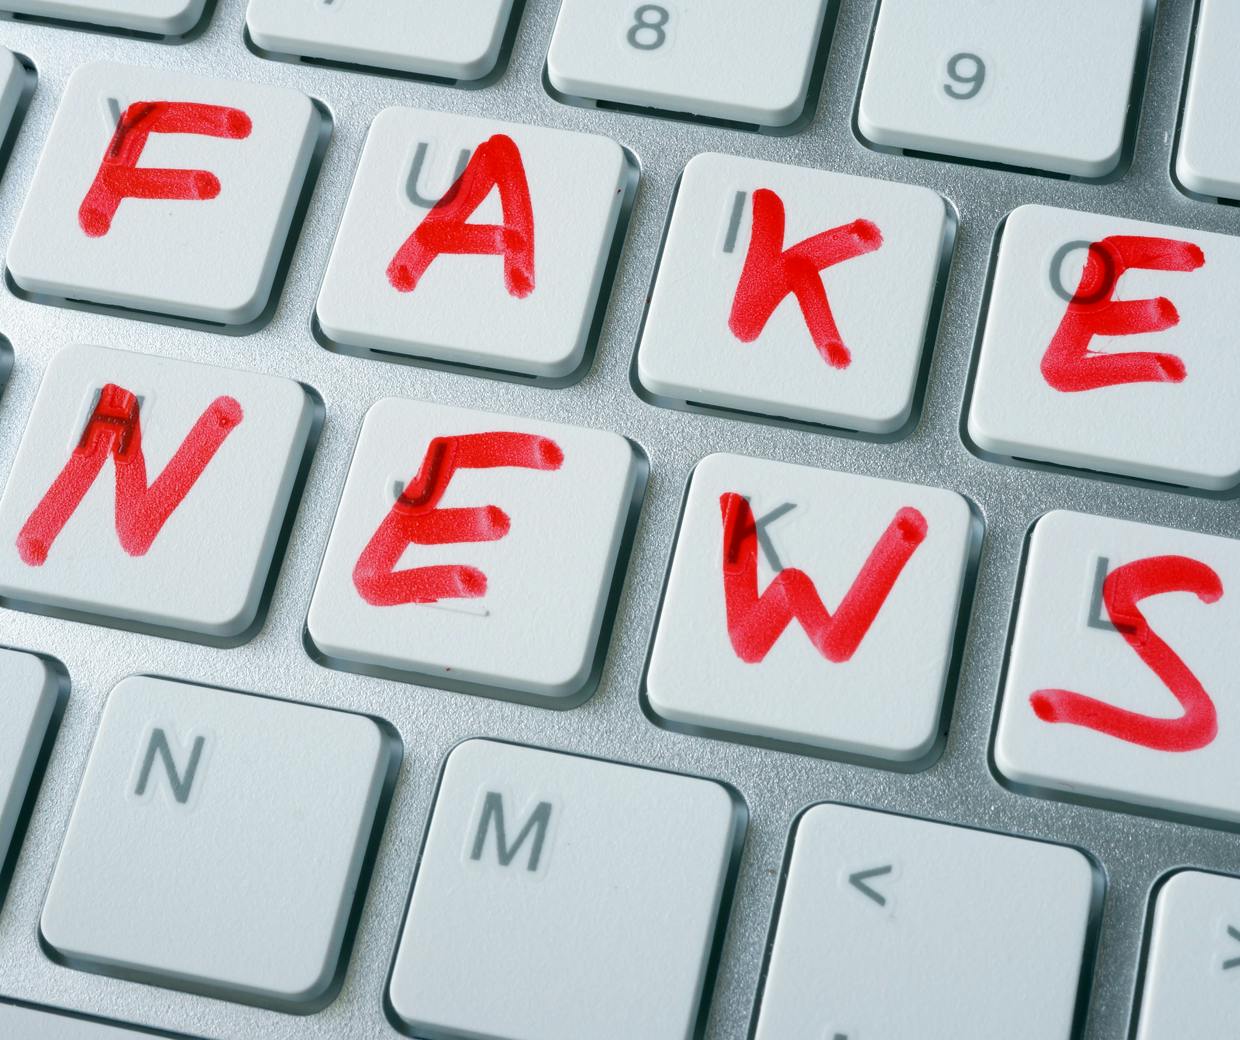 The fake news effect and what it means for advertisers